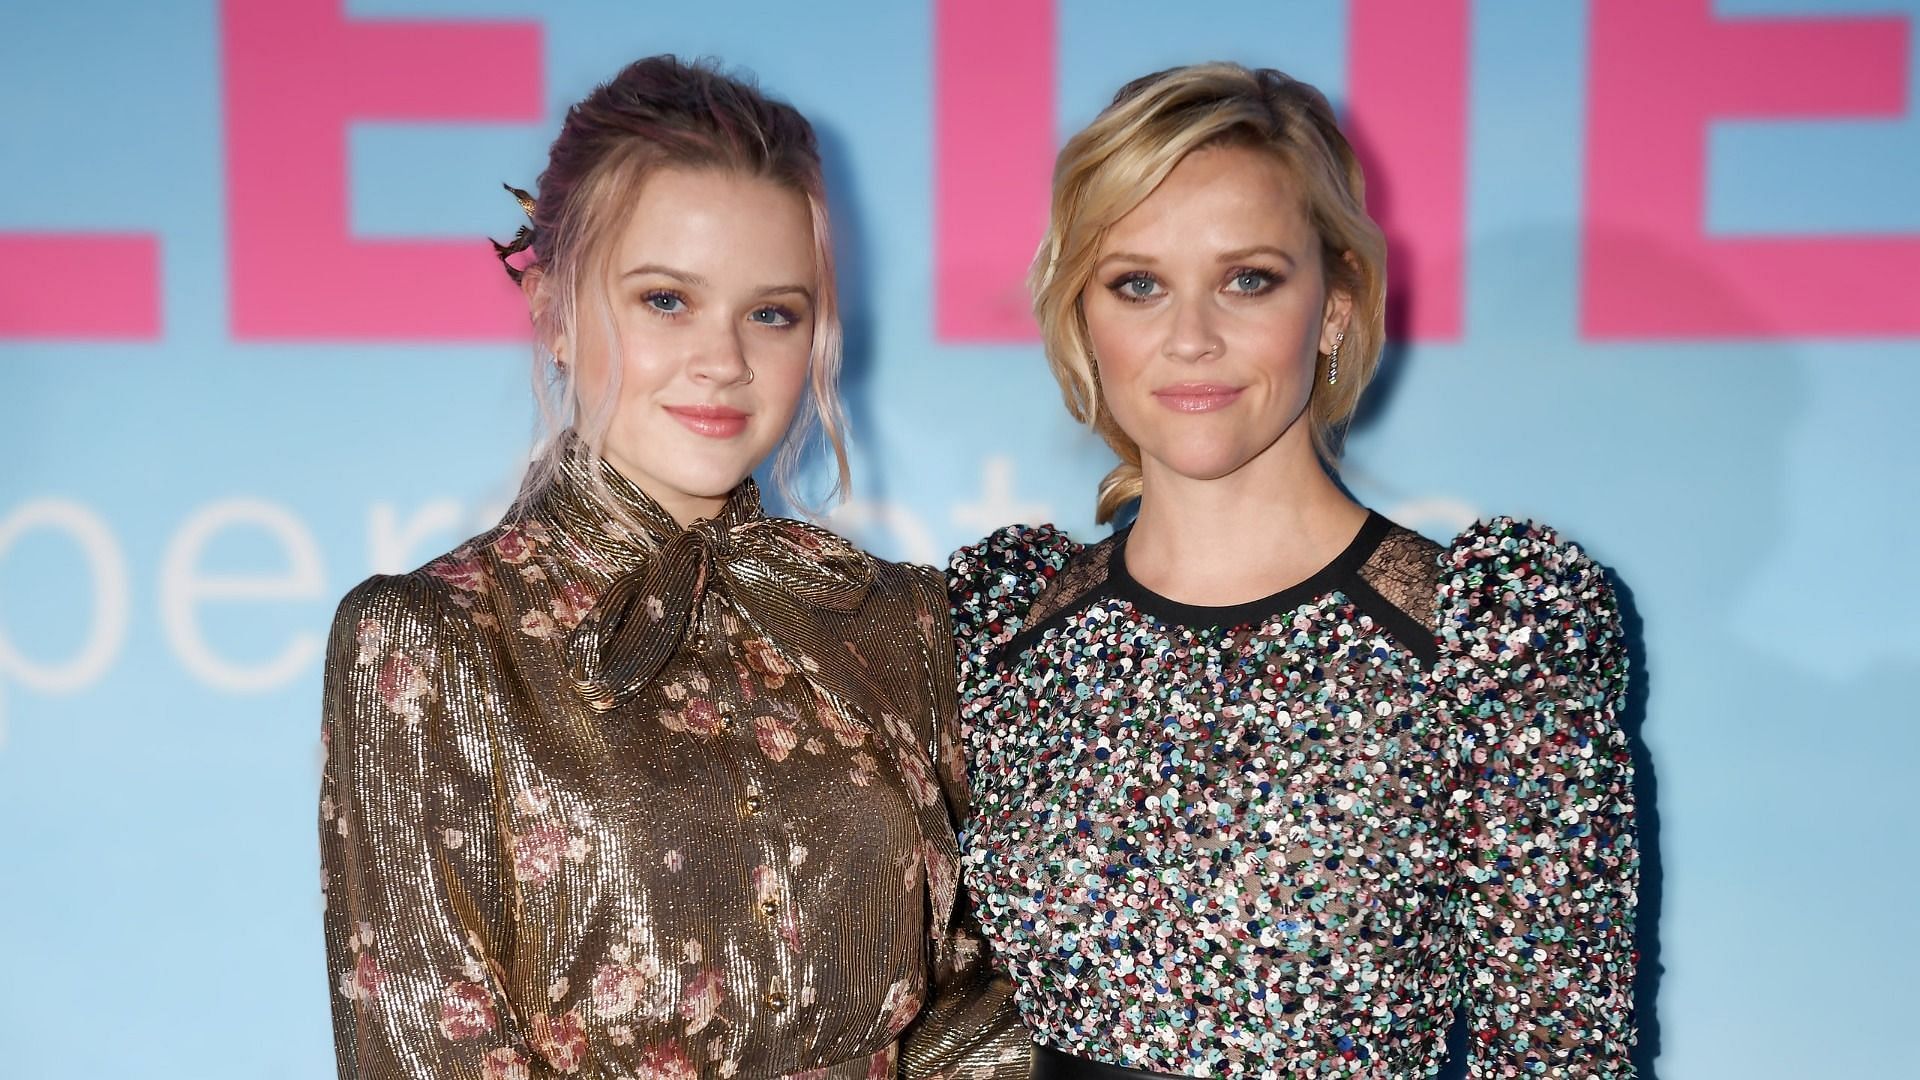 Reese Witherspoon and Ava Phillippe posed for a photograph together as they held their champagne glasses (Image via Getty Images/ Jeff Kravitz)